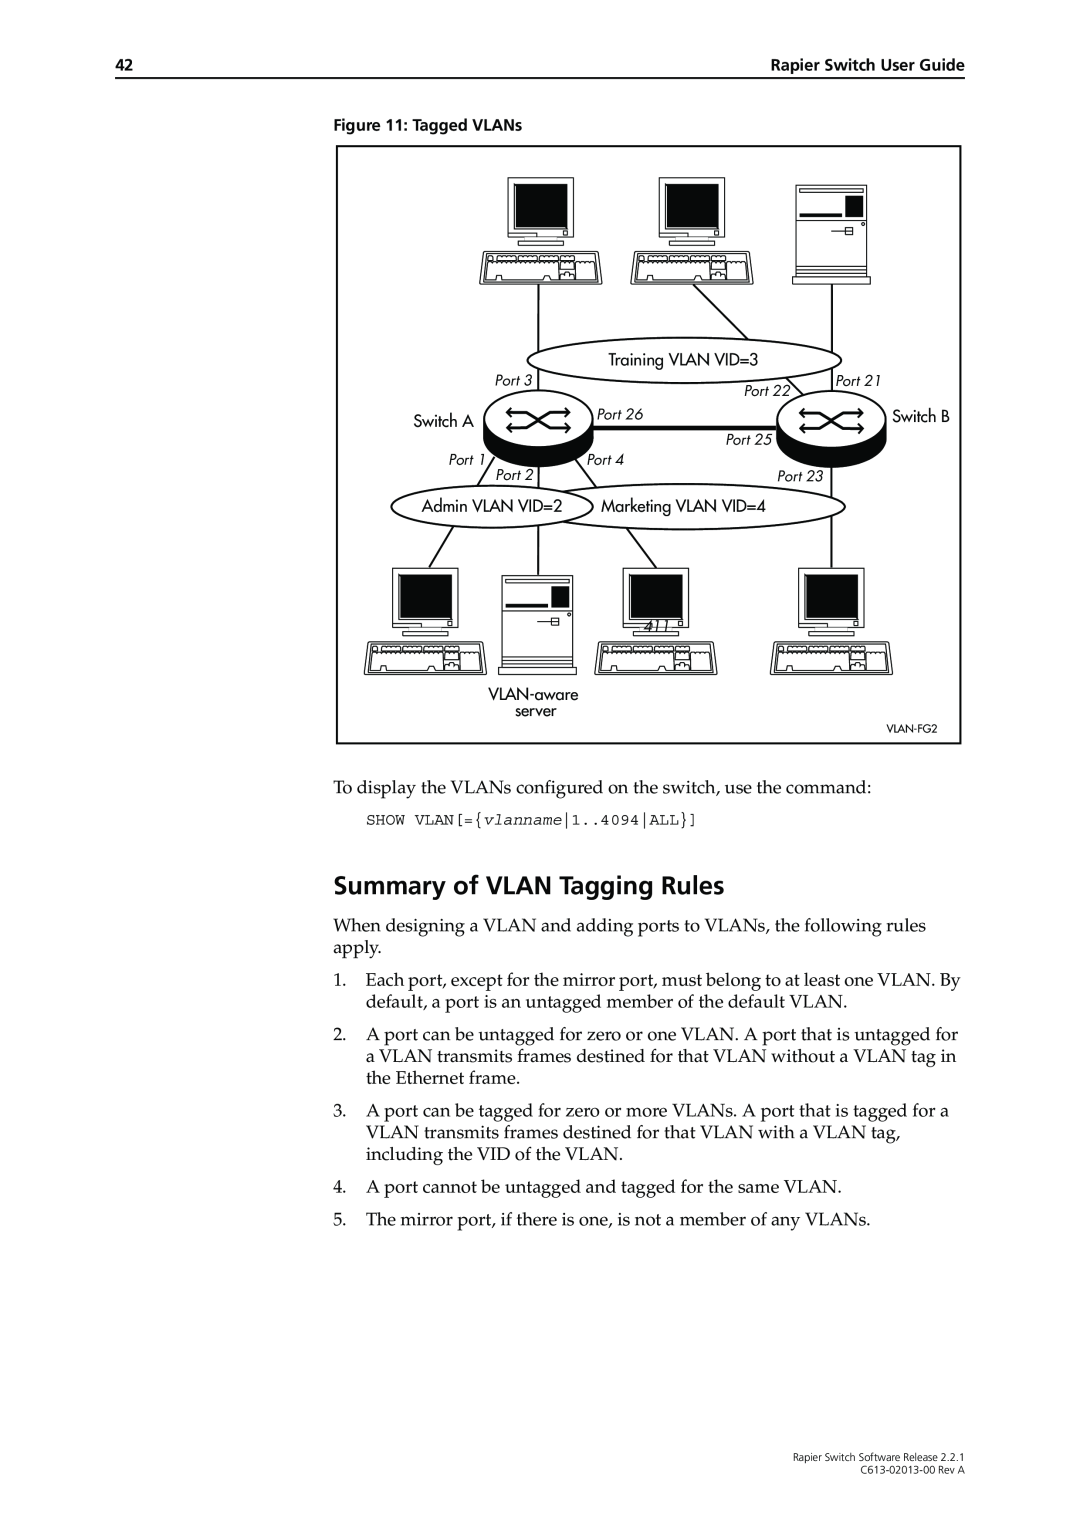 Allied Telesis C613-02013-00 manual Summary of VLAN Tagging Rules, Tagged VLANs 